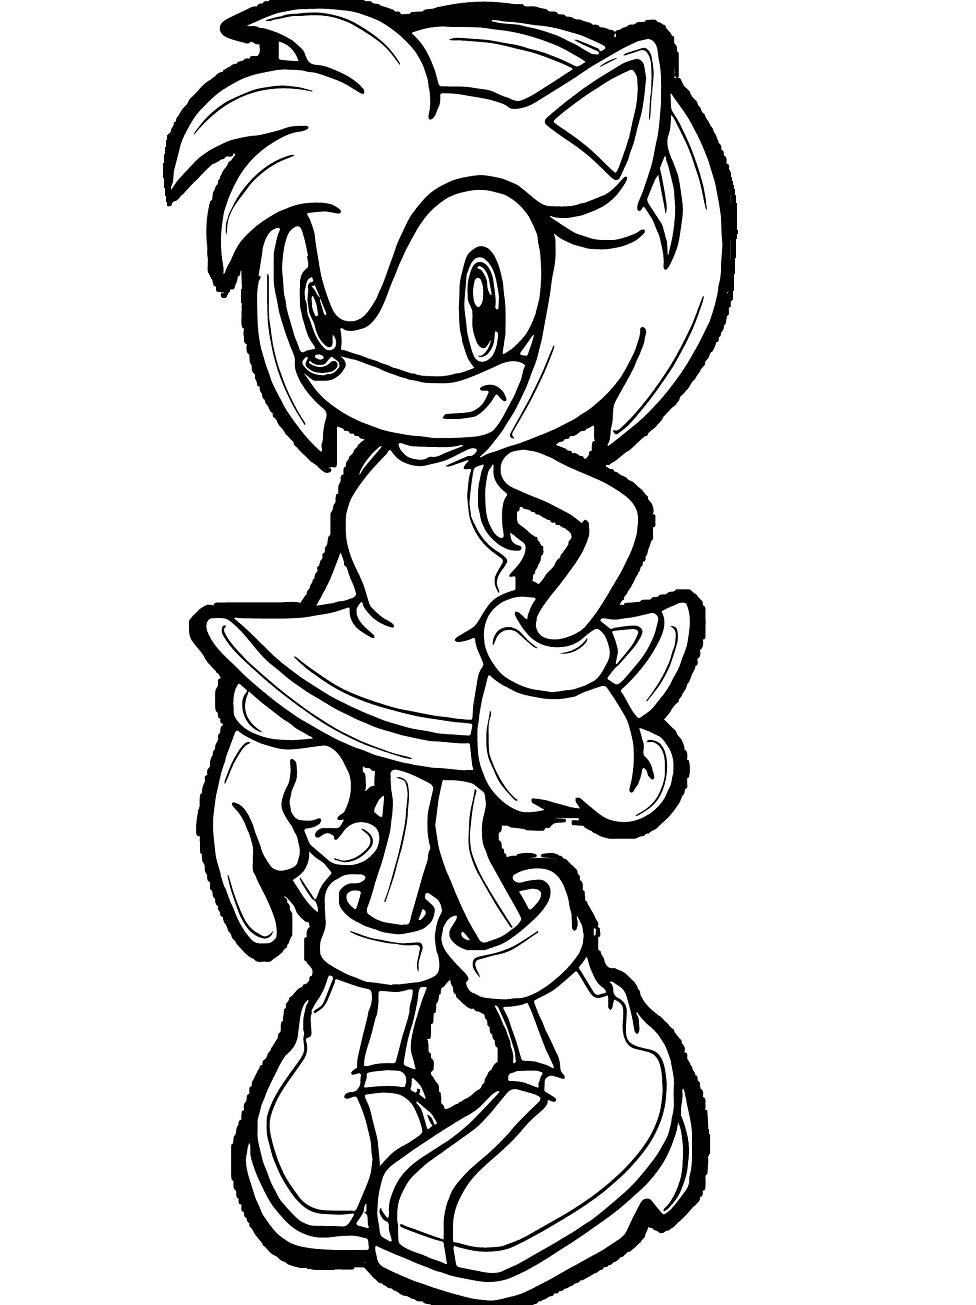 Curious Amy Rose Coloring Page. 